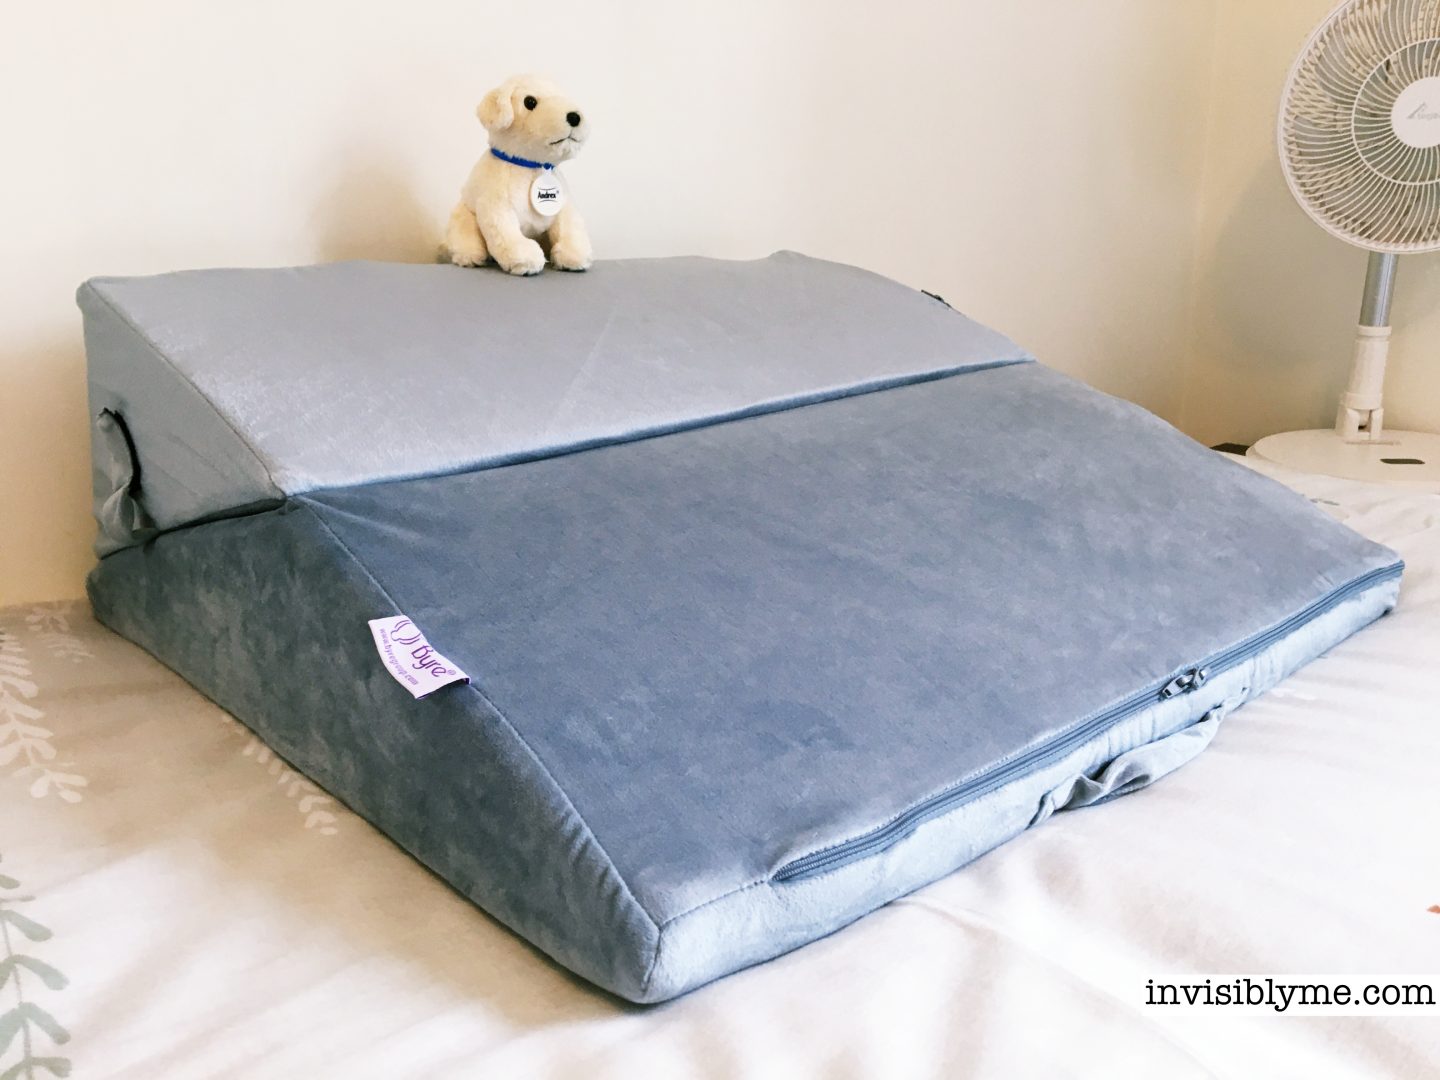 A photo of the Byre folding bed wedge for this review sat on my duvet cover on my bed against a cream wall. It's downwards for a slope to lie on. An Andrex soft puppy toy sits on top.